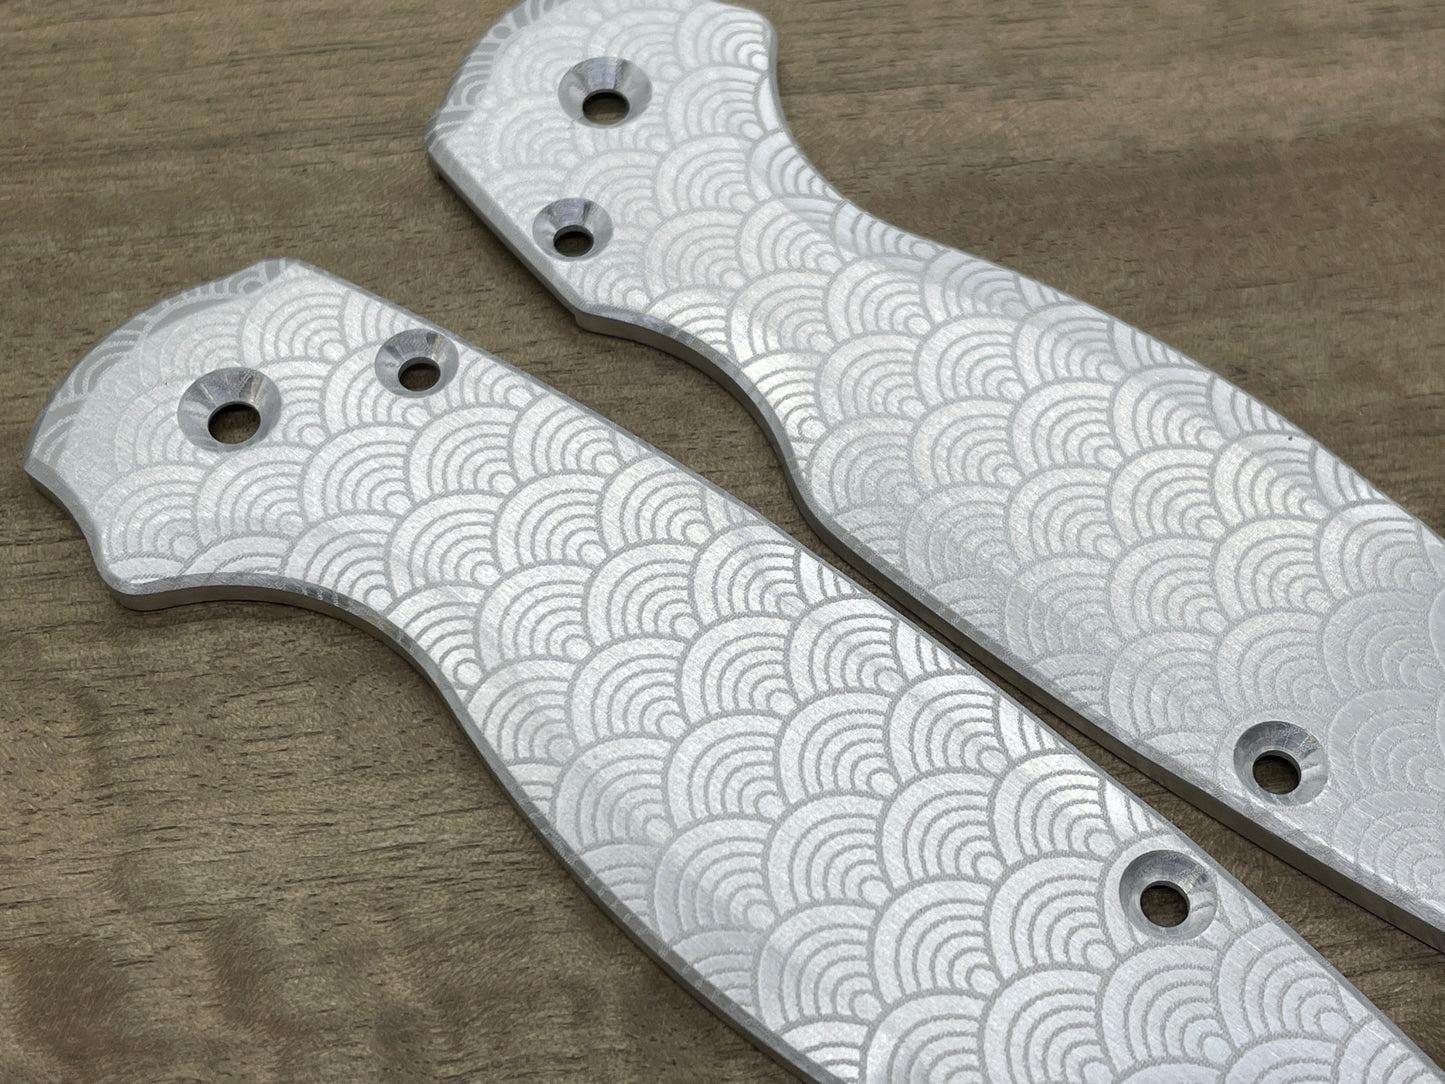 SEIGAIHA pattern Aerospace Aluminum scales for Spyderco Paramilitary 2 PM2